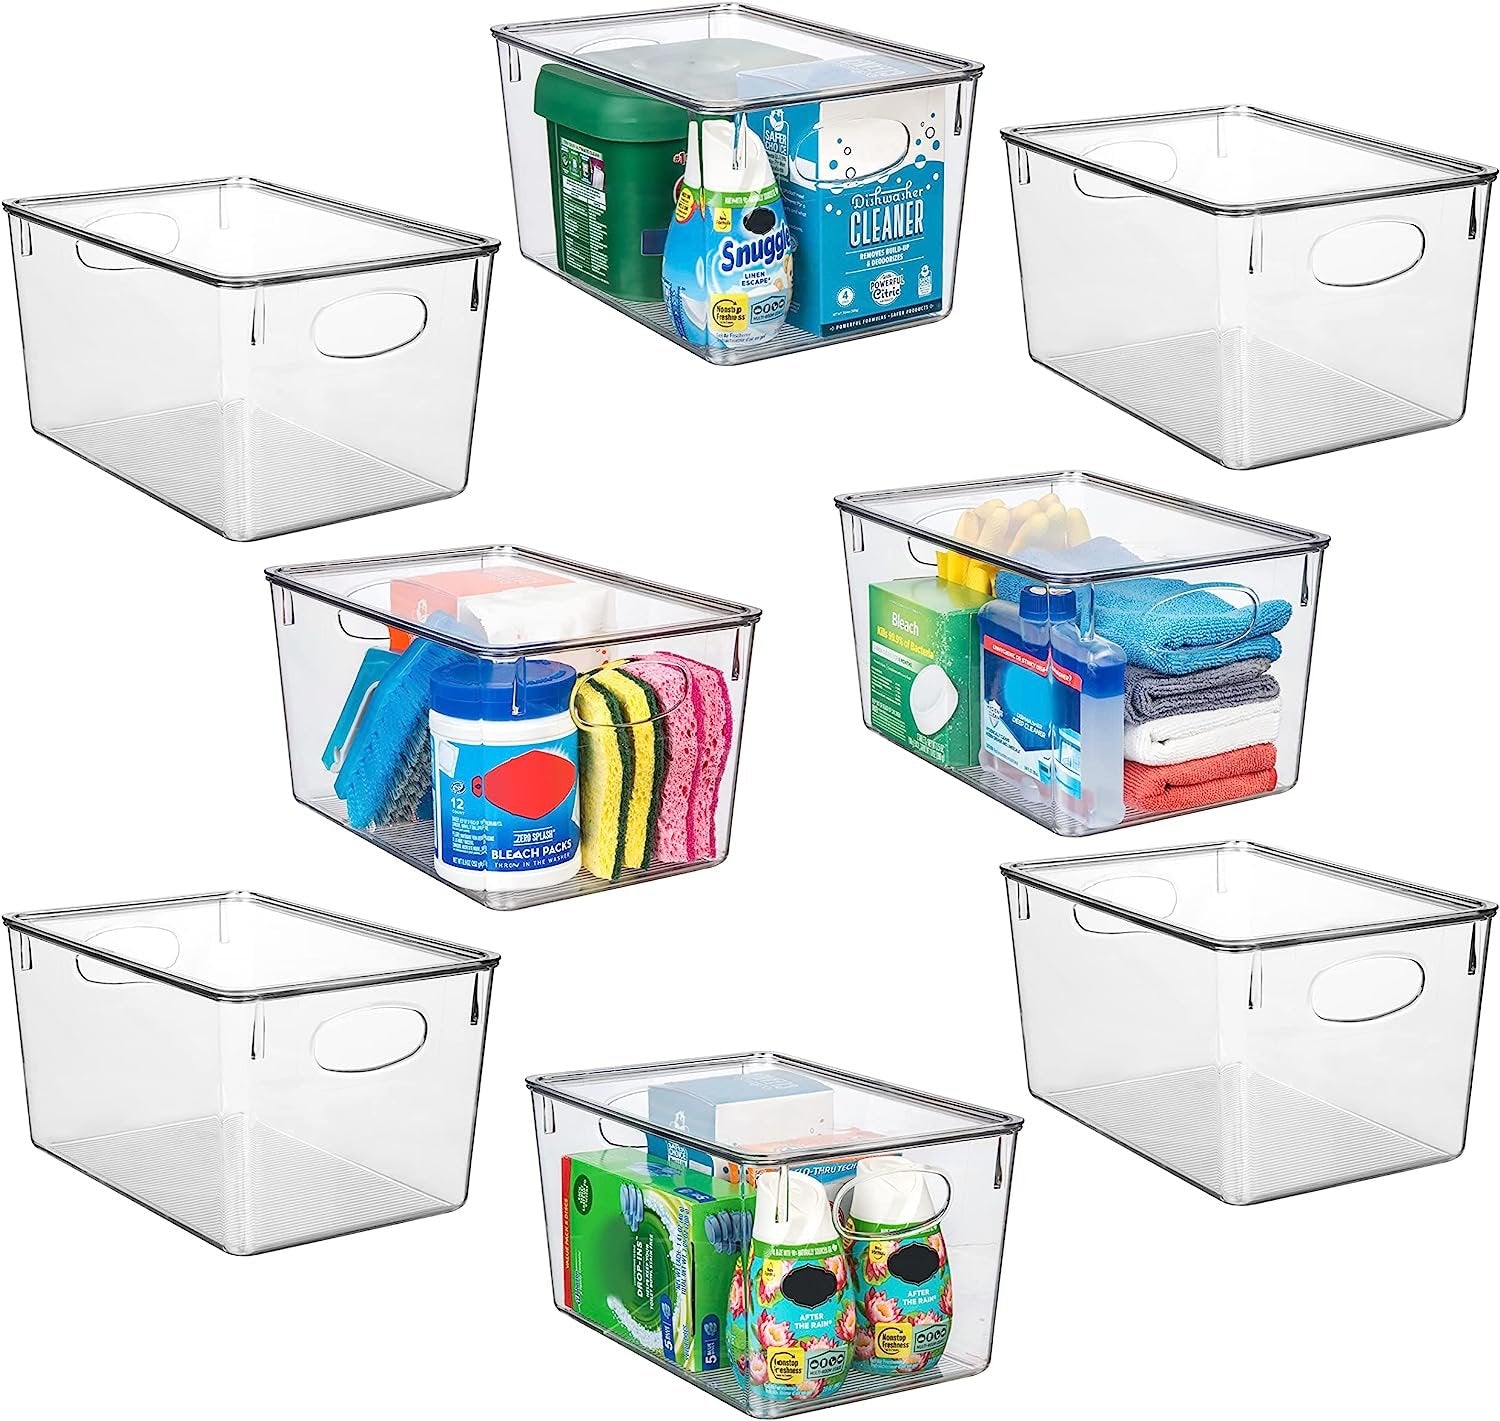 ClearSpace Plastic Storage Bins With lids – Perfect Kitchen Organization or Pantry Storage – Fridge Organizer, Pantry Organization and Storage Bins, Cabinet Organizers